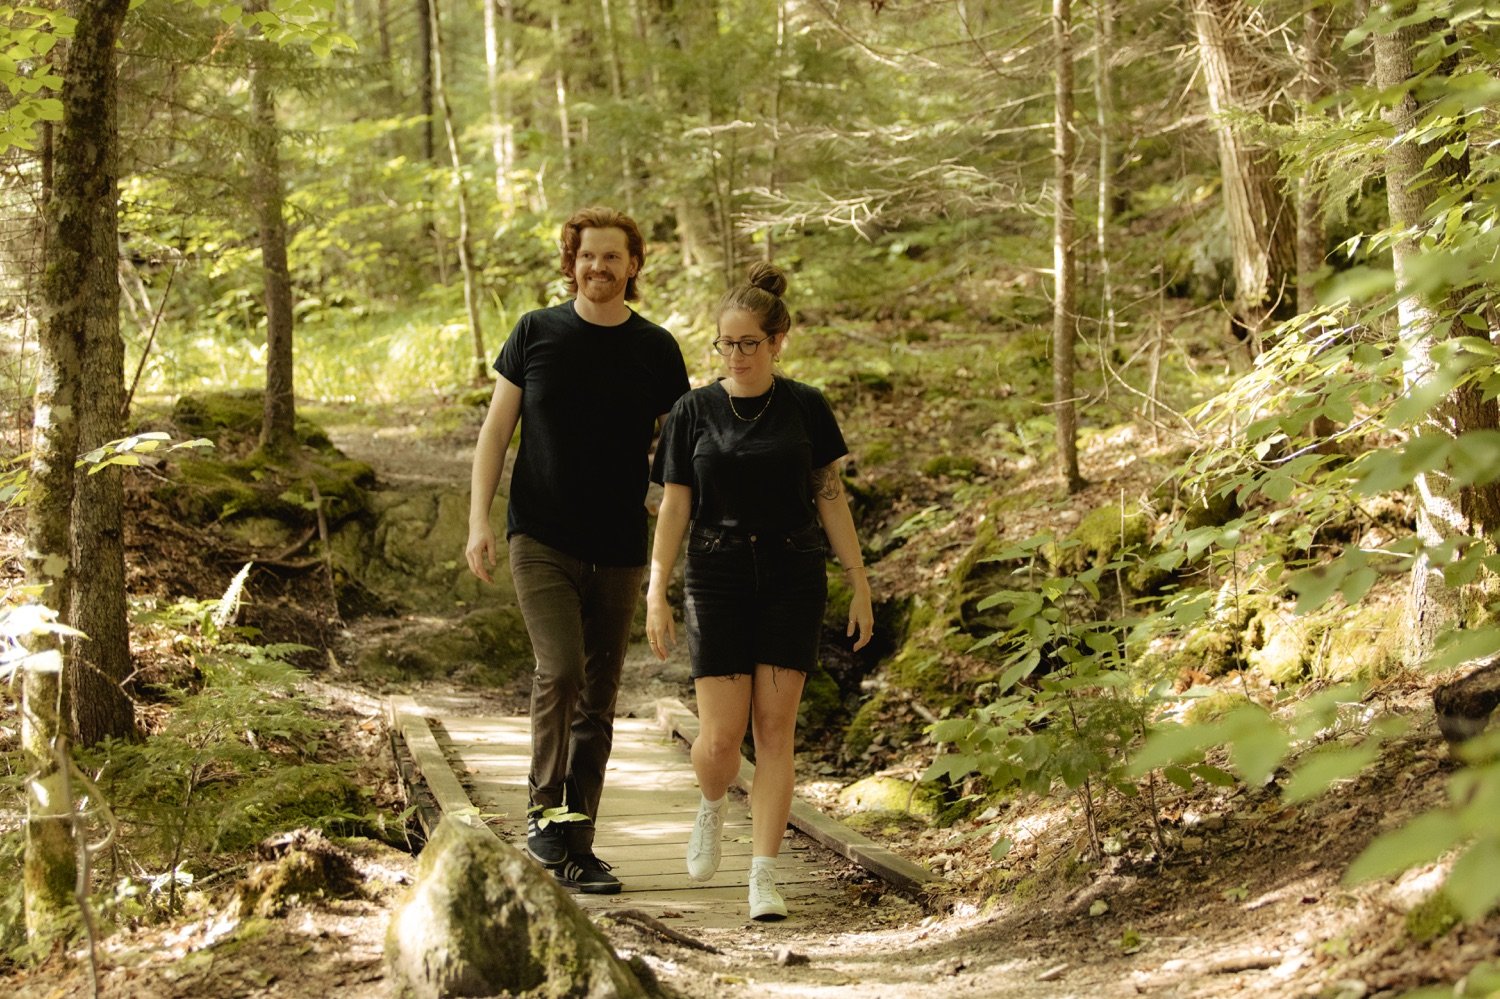 17_couple walking through wooded green mountain national forest texas falls hancock vermont .jpg